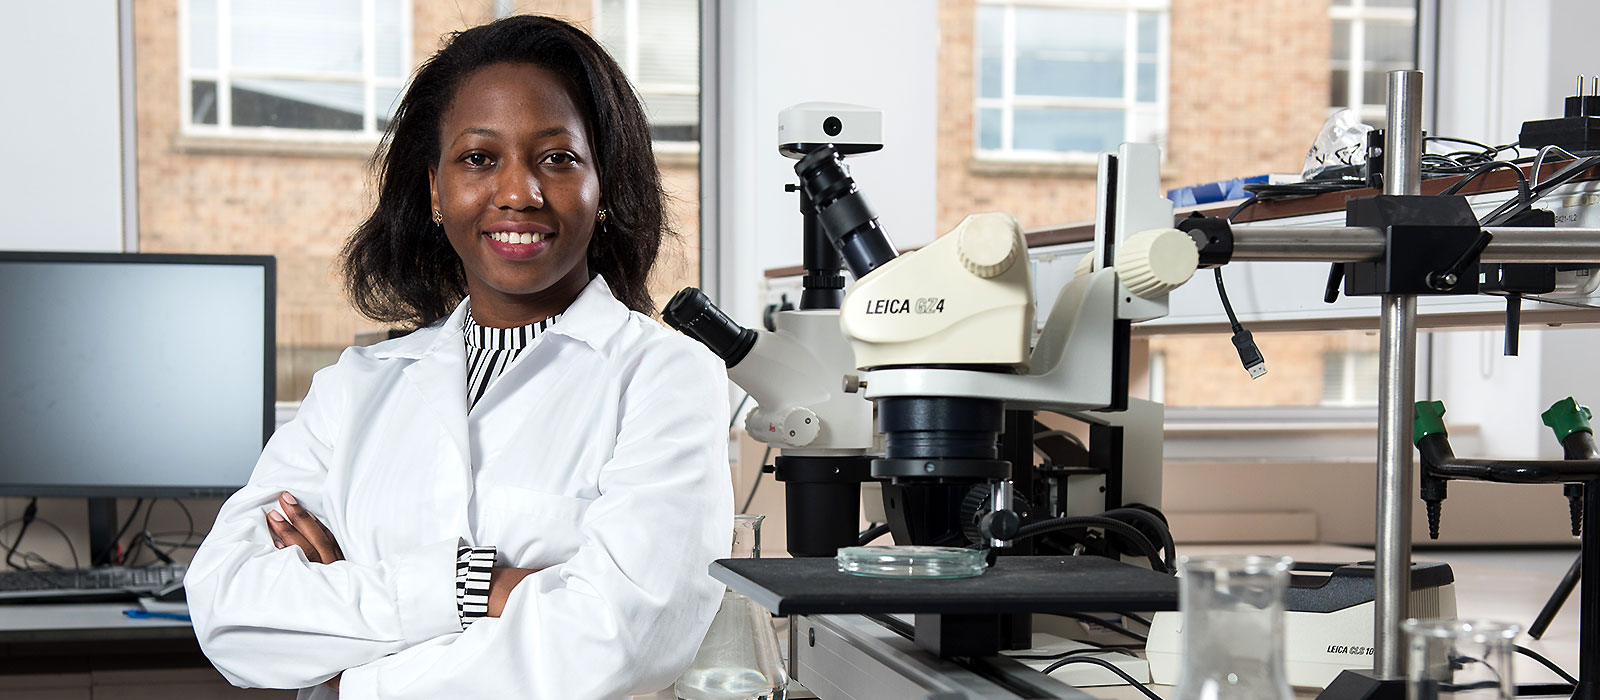 Claire Nakabugo during her master's degree at Oxford. Photo by John Cairns